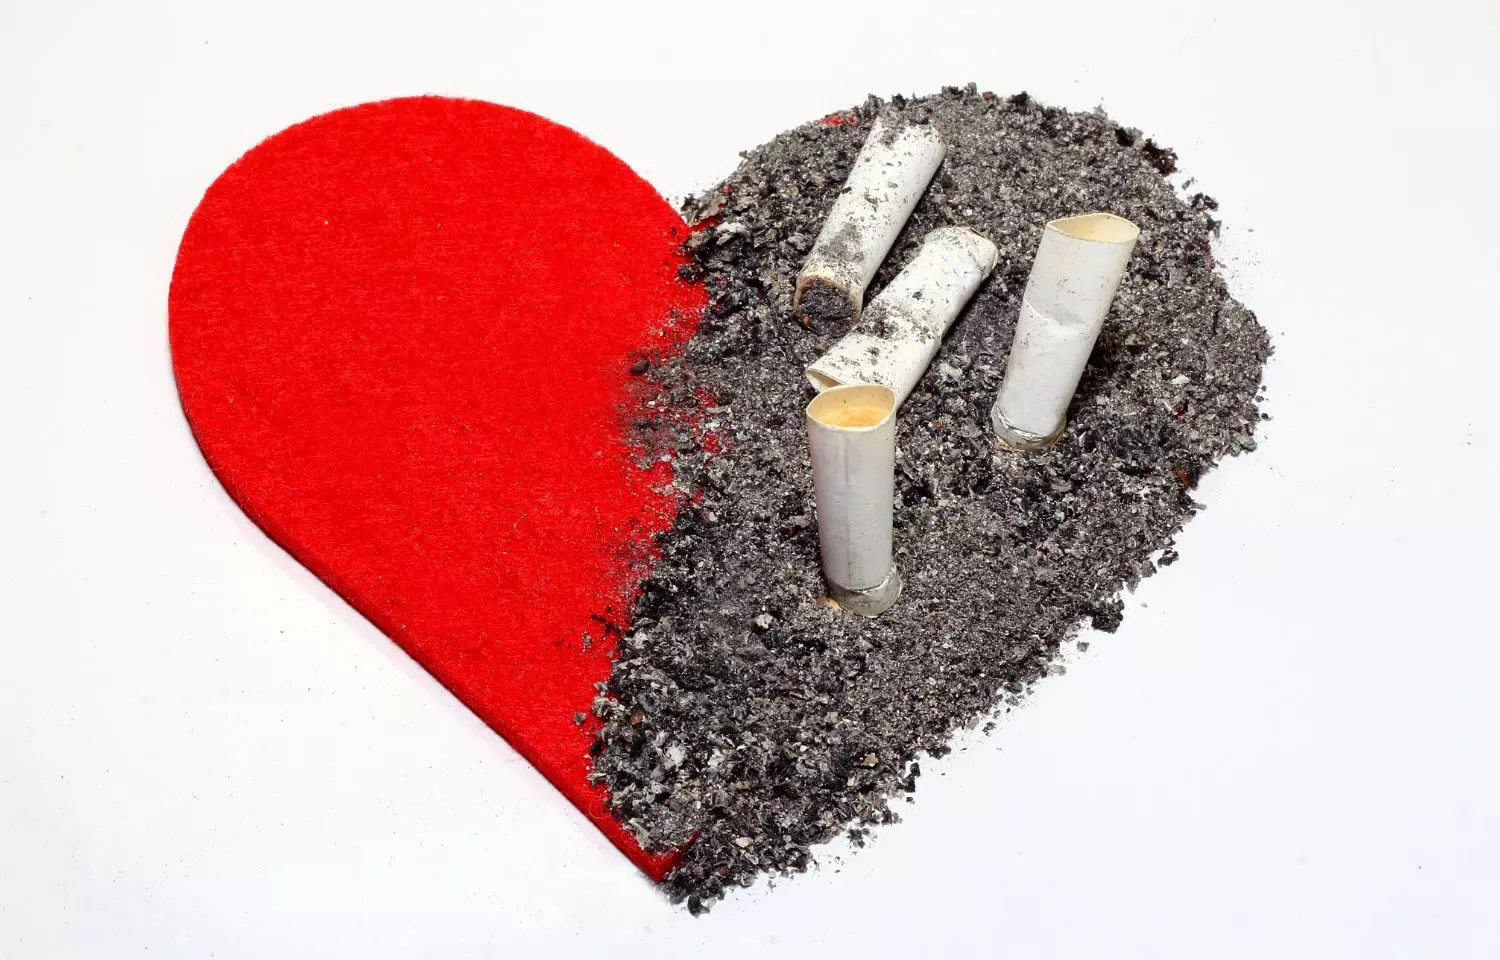 Cigarette smoking may double risk of developing heart failure, finds study